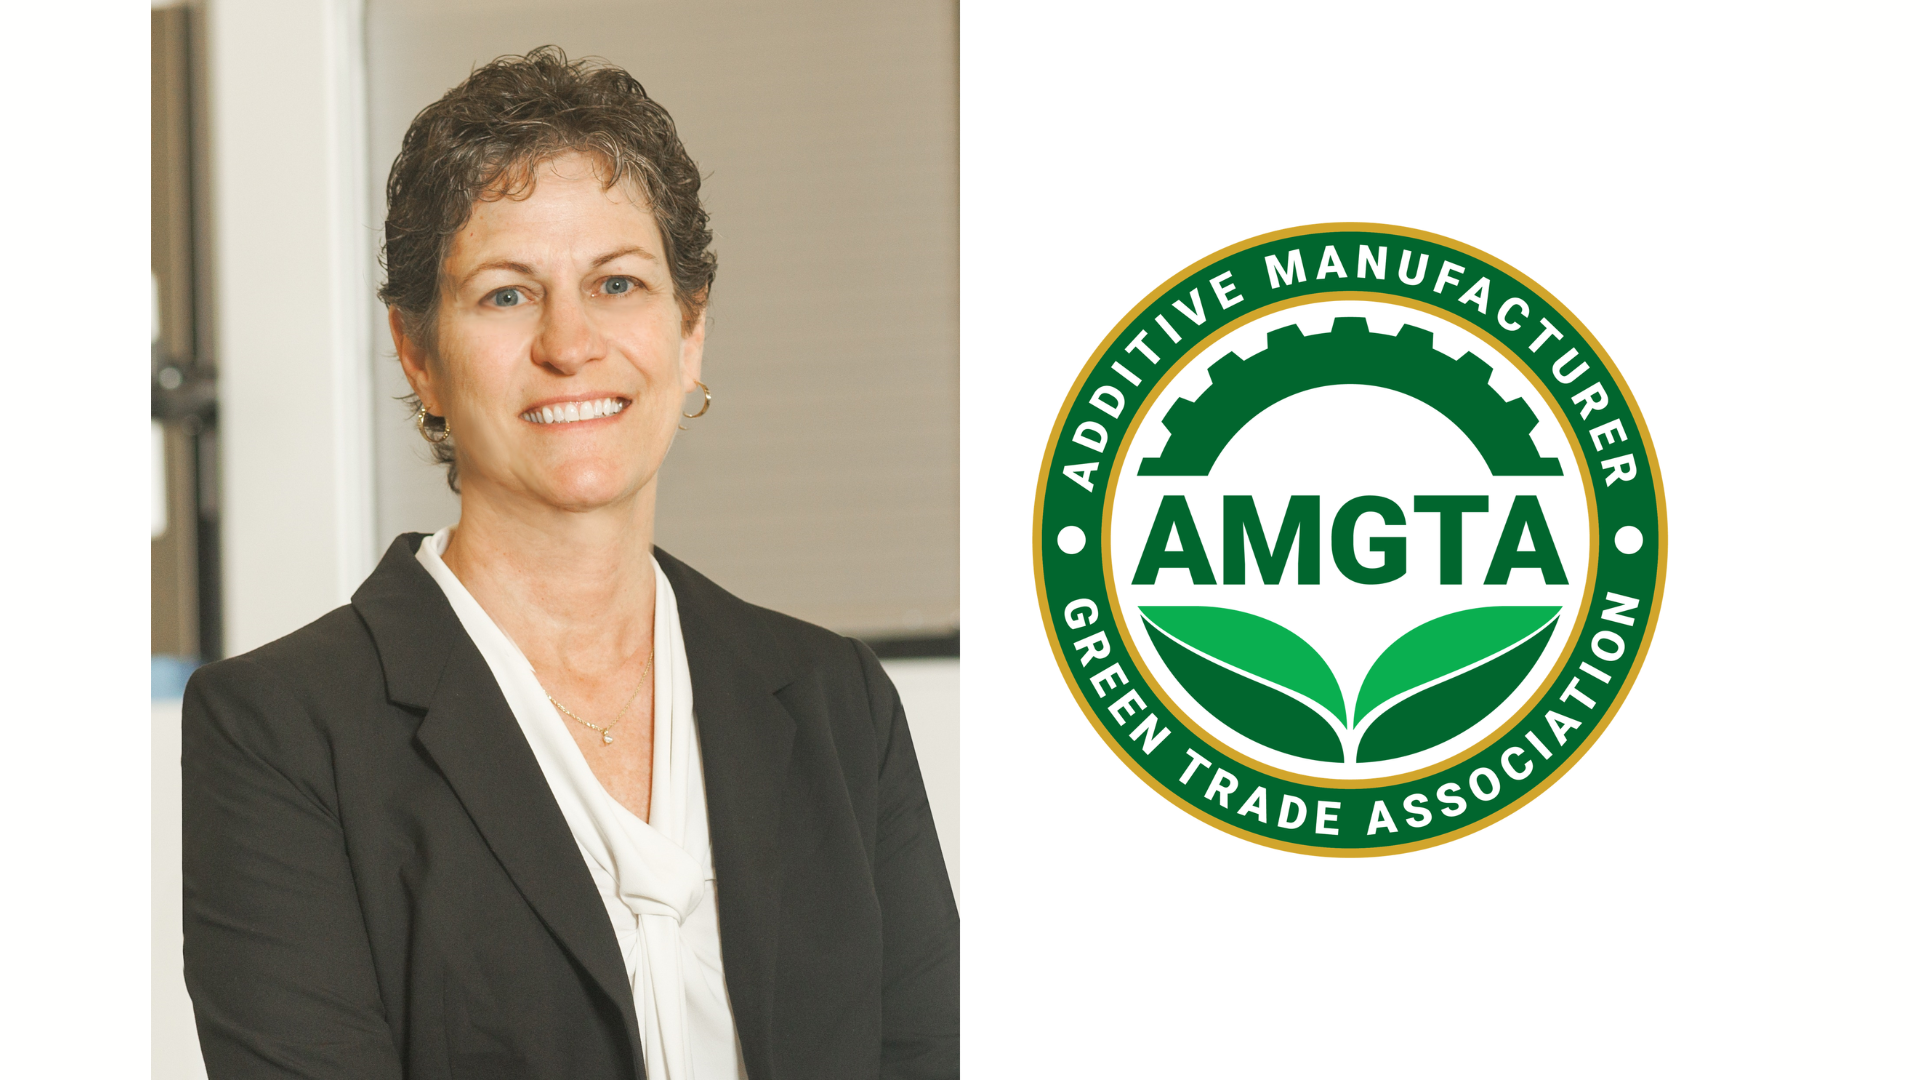 The Additive Manufacturer Green Trade Association (AMGTA), announced that it had named Sherri Monroe its new Executive Director